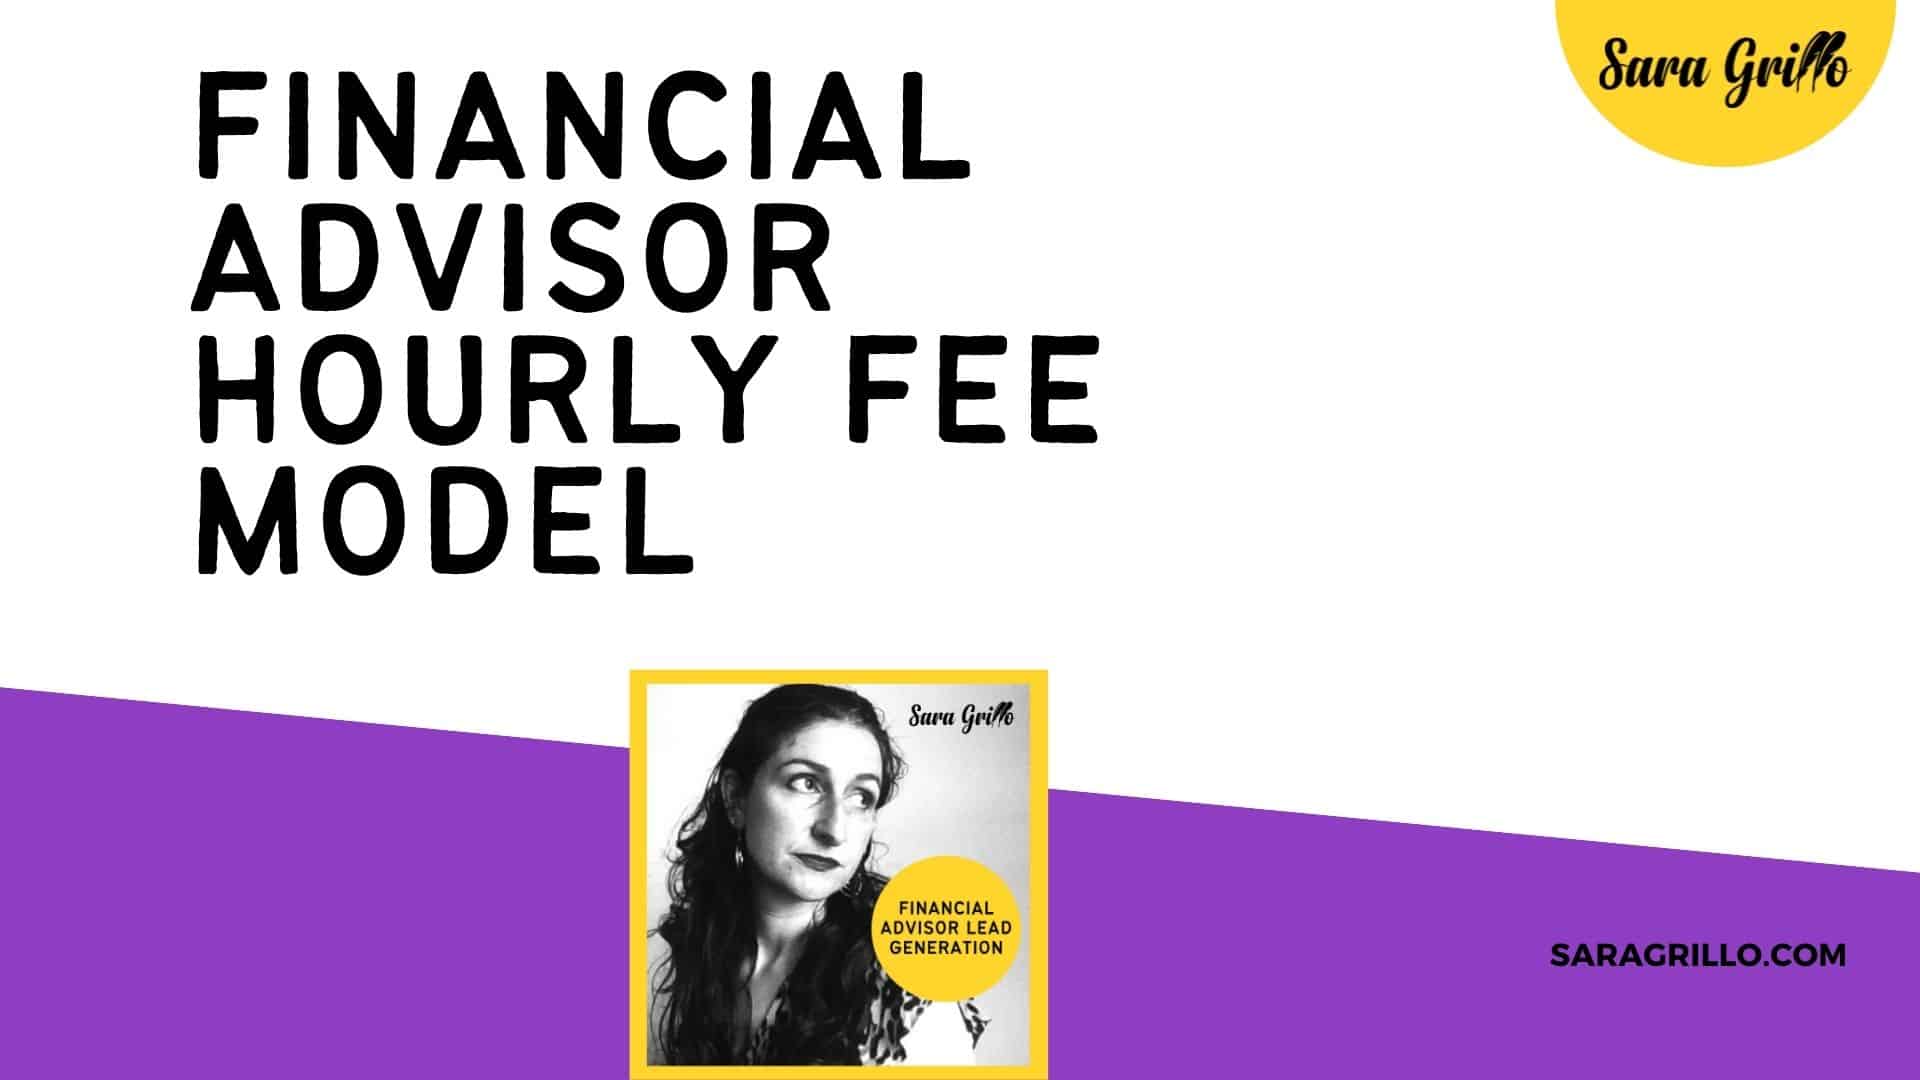 In this podcast we discuss the financial advisor hourly fee model.